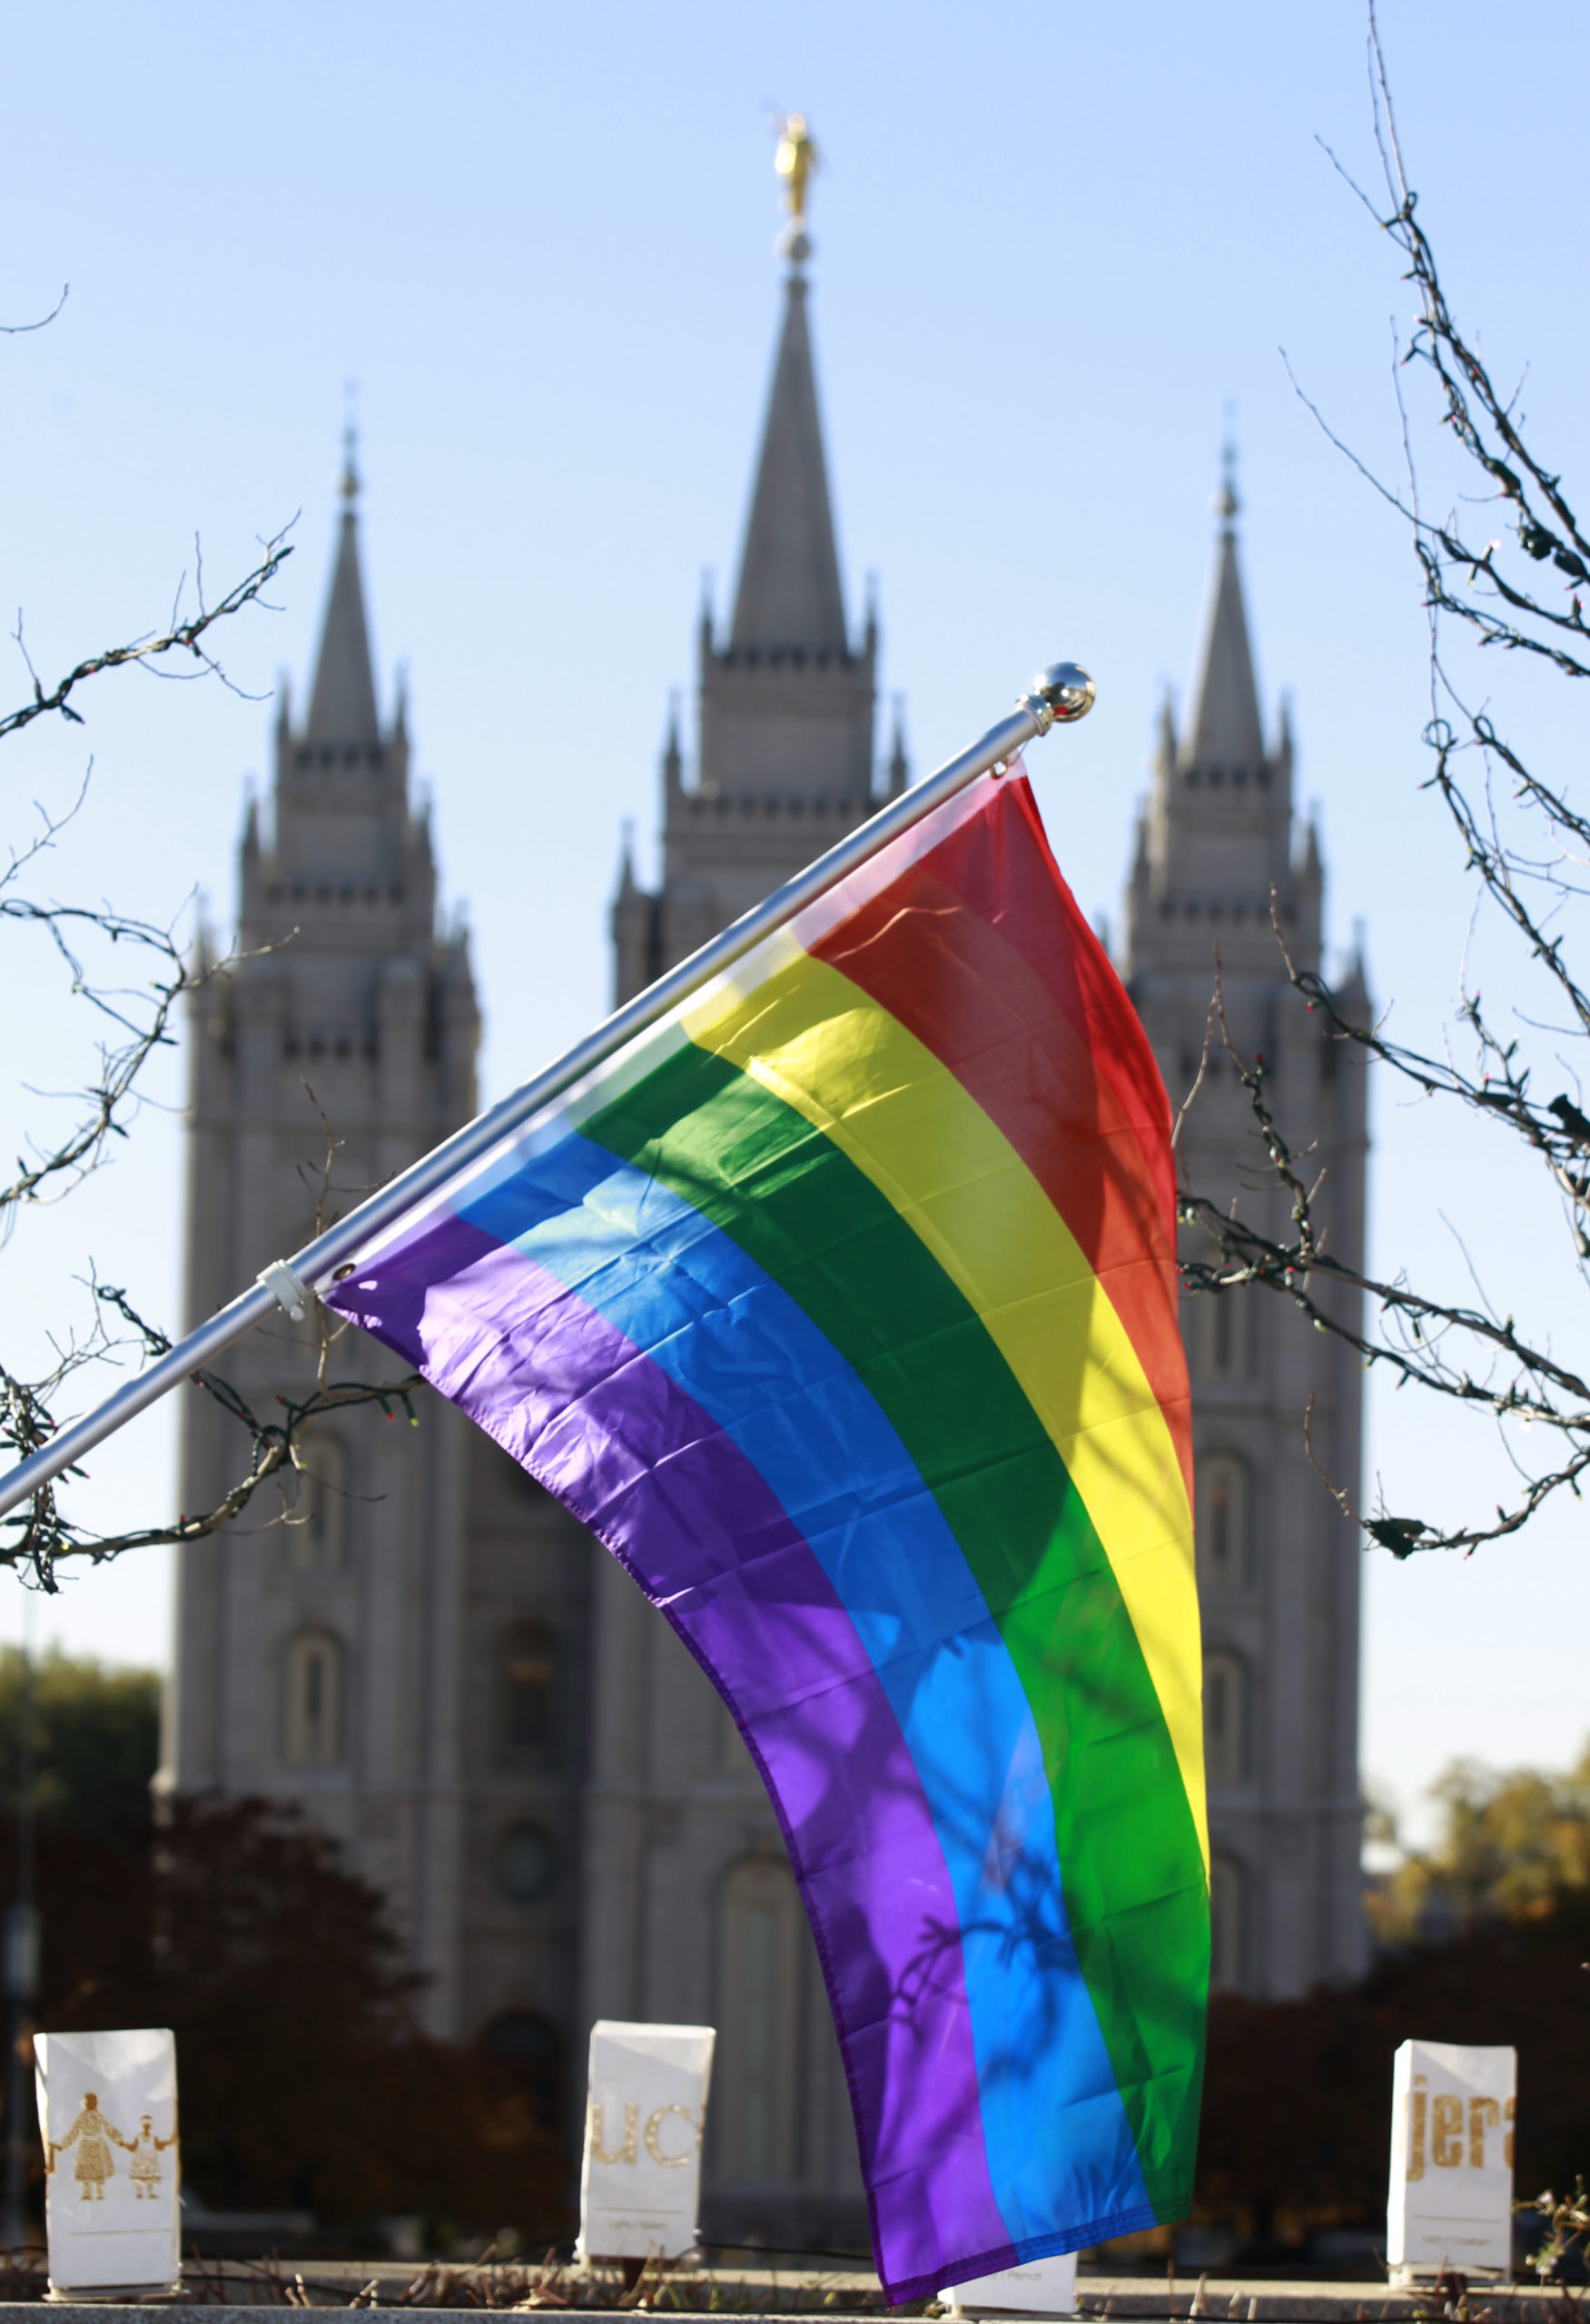 SALT LAKE CITY, UT - NOVEMBER14: A pride flag flies in front of the Historic Mormon Temple as part of a protest where people resigned from the Church of Jesus Christ of Latter-Day Saints in response to a recent change in church policy towards married LGBT same sex couples and their children on November 14, 2015 in Salt Lake City, Utah. A little over a week ago the Mormon church made a change in their official handbook of instructions requiring a disciplinary council and possible excommunication for same sex couples and banning the blessing and baptism of their children into the church. (Photo by George Frey/Getty Images)